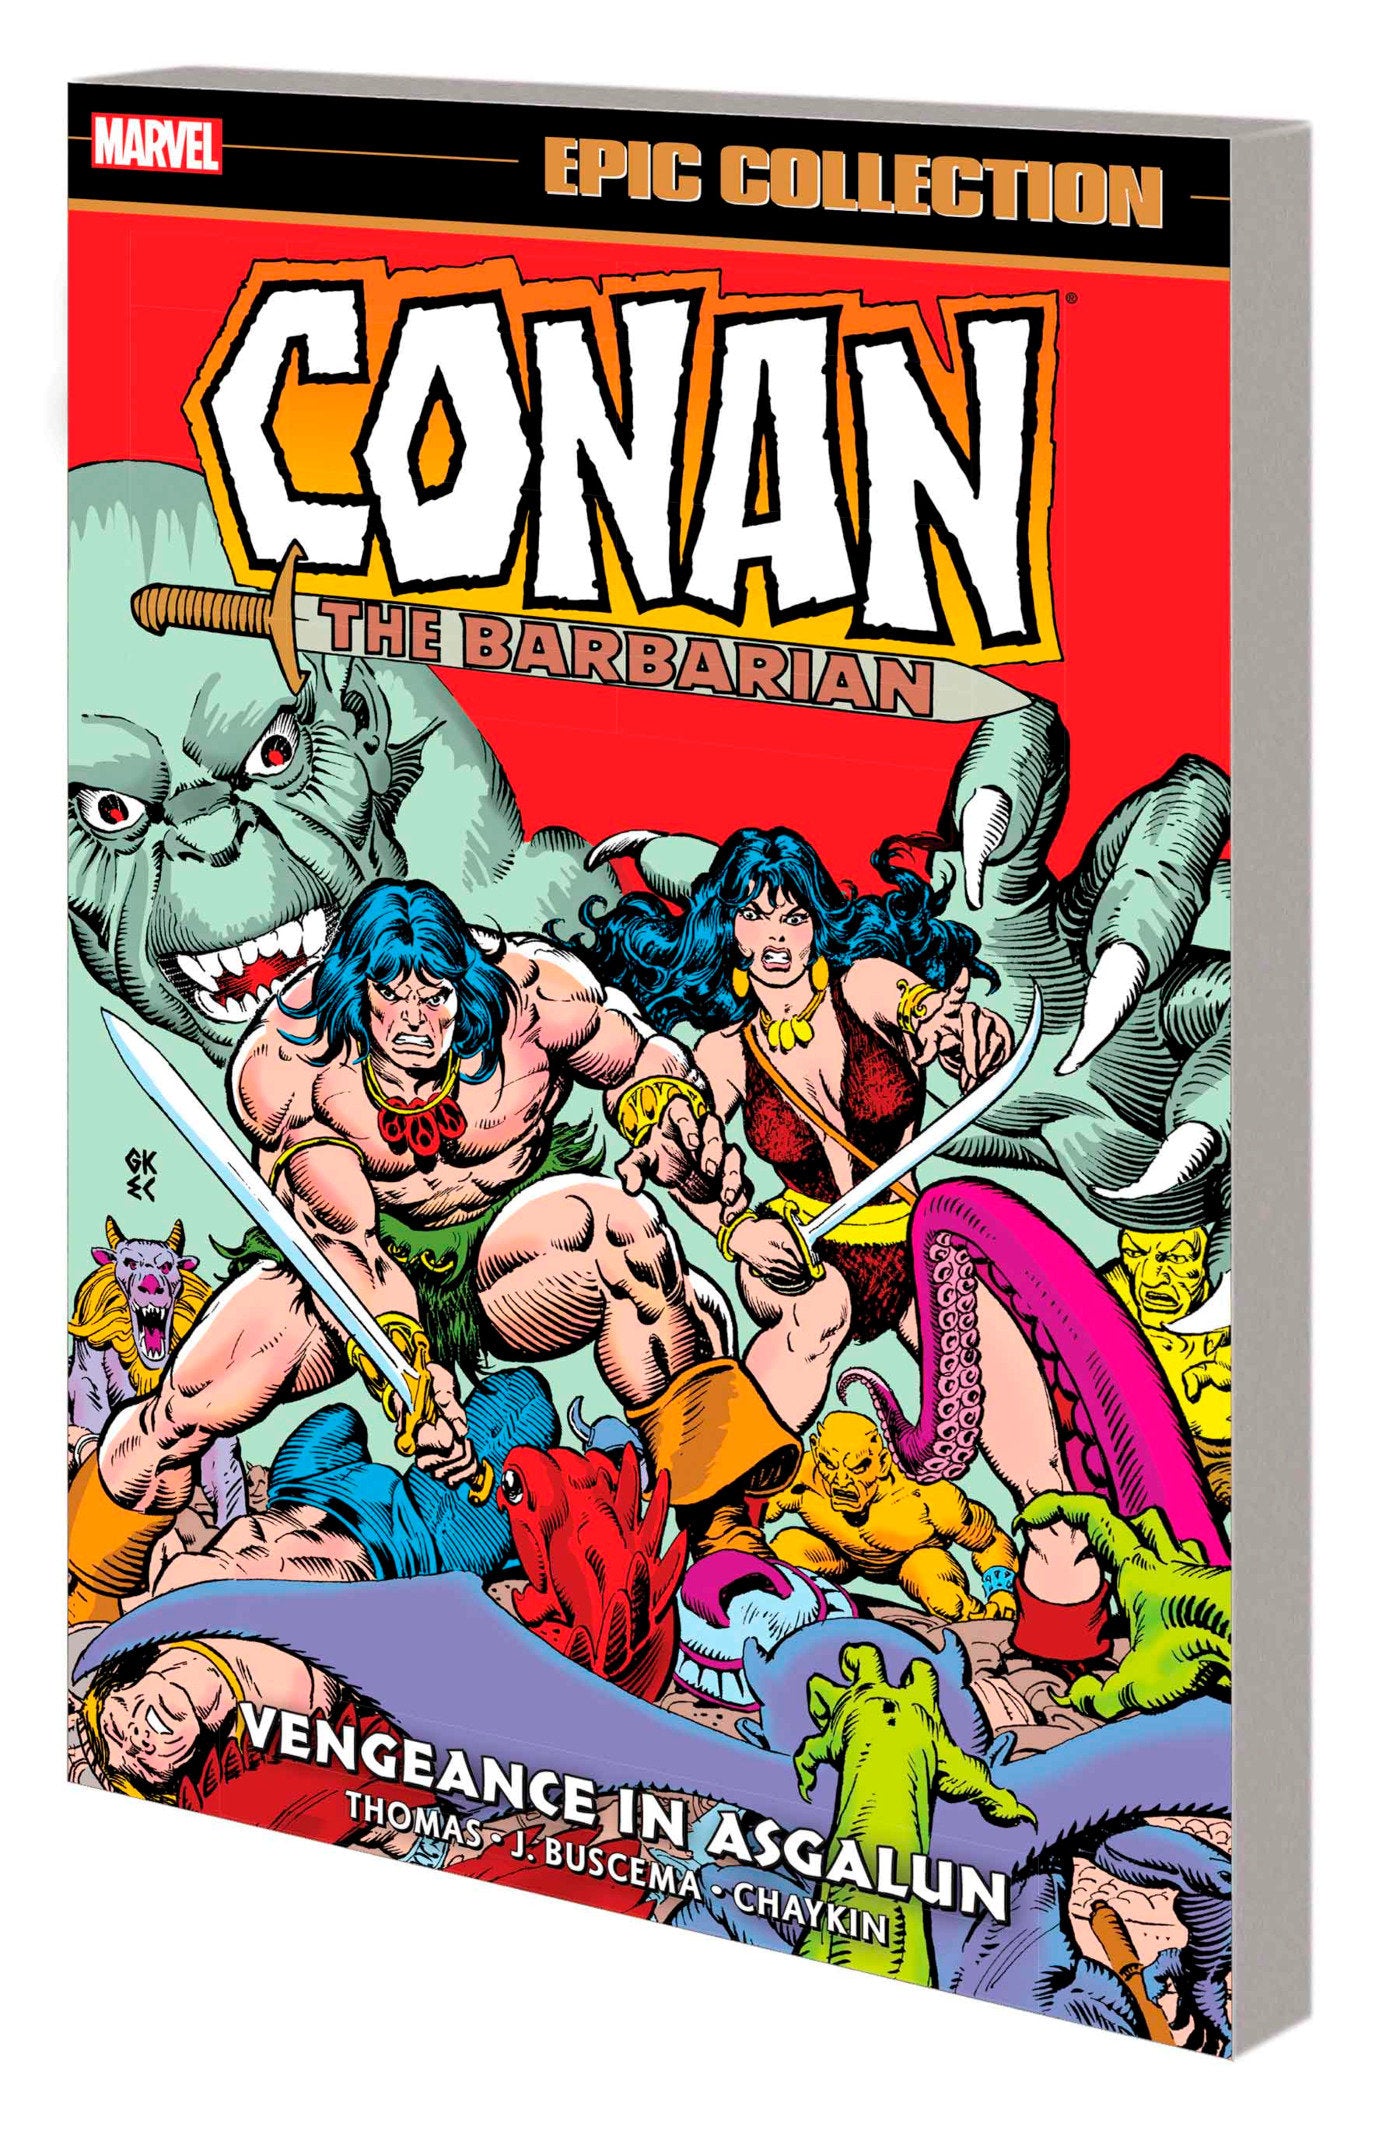 CONAN THE BARBARIAN EPIC COLLECTION: THE ORIGINAL MARVEL YEARS - VENGEANCE IN AS GALUN TRADE PAPERBACK